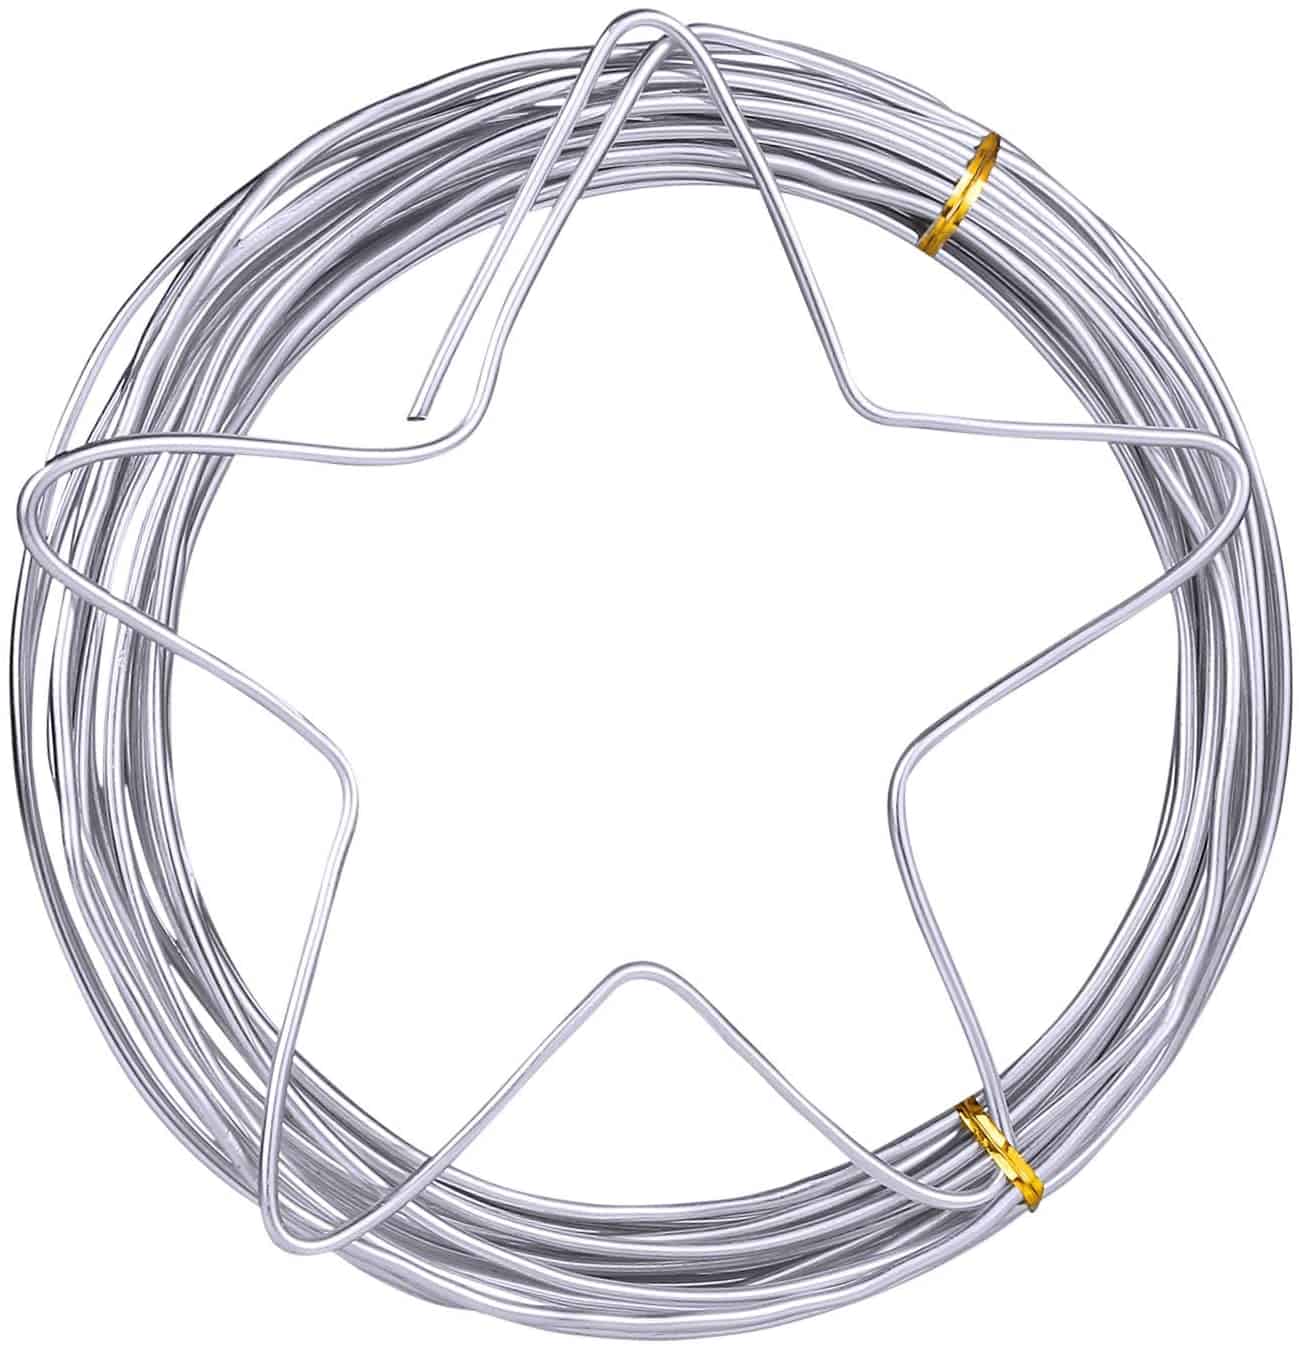 Best aluminum & best budget claymation armature wire- Silver Aluminum Wire Metal Craft Wire